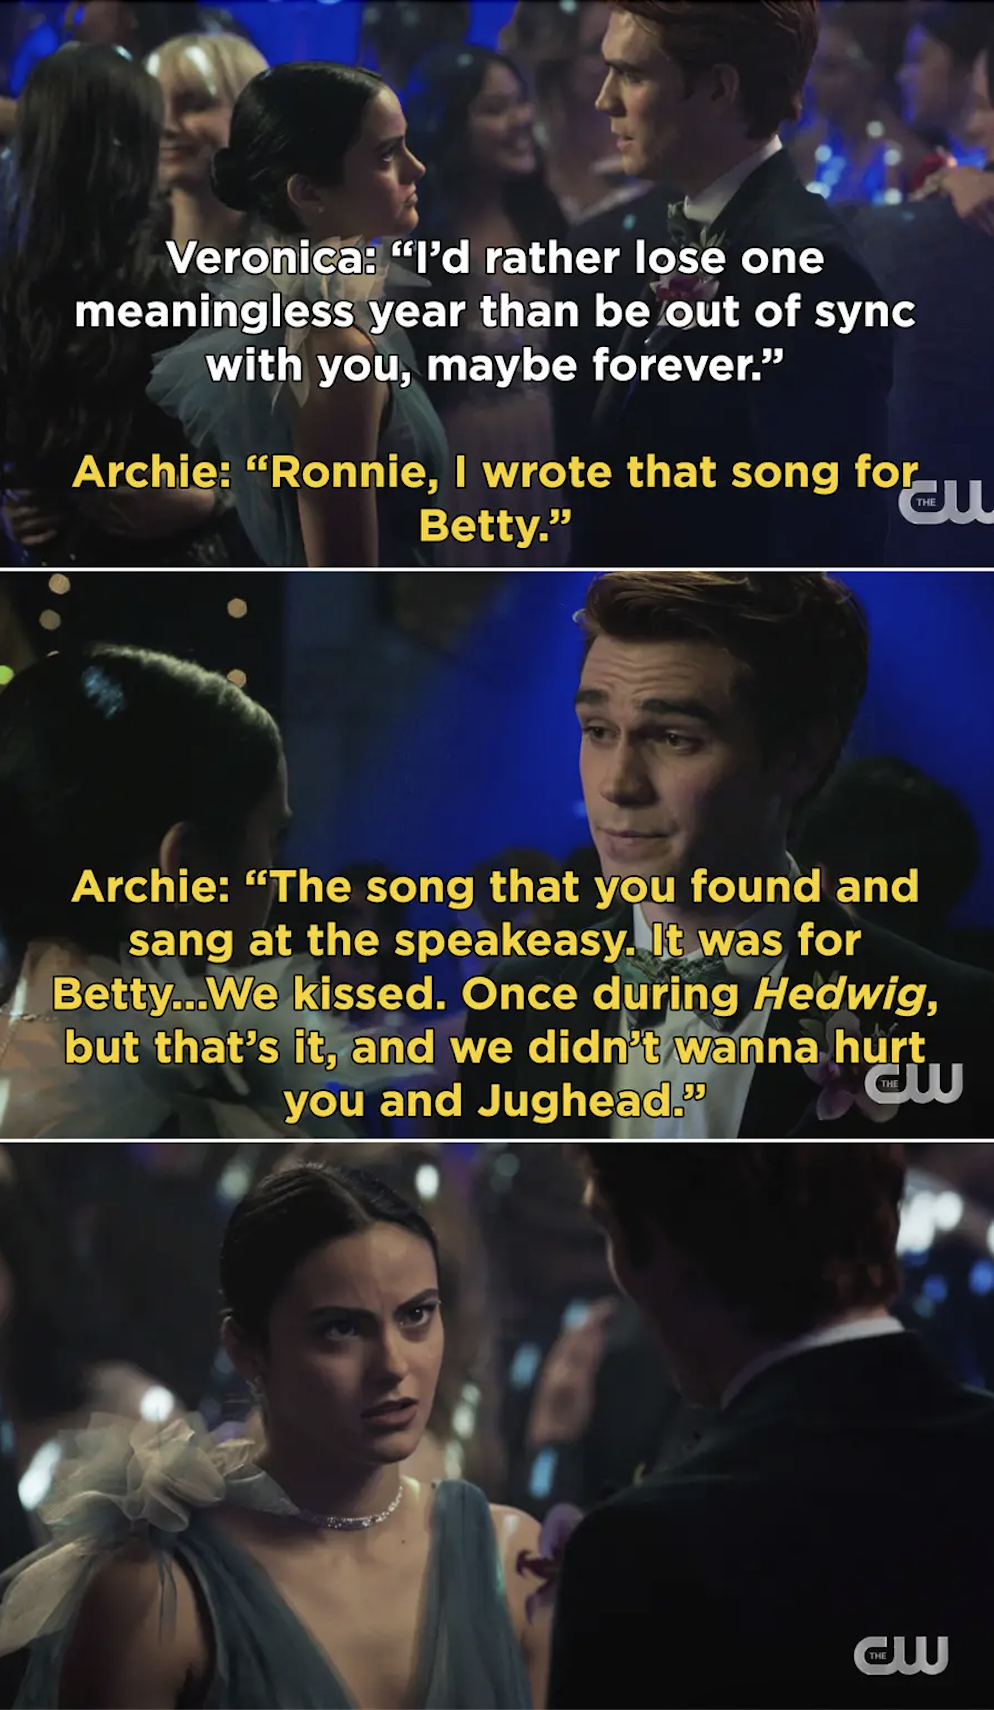 Archie telling Veronica at a dance that he kissed Betty